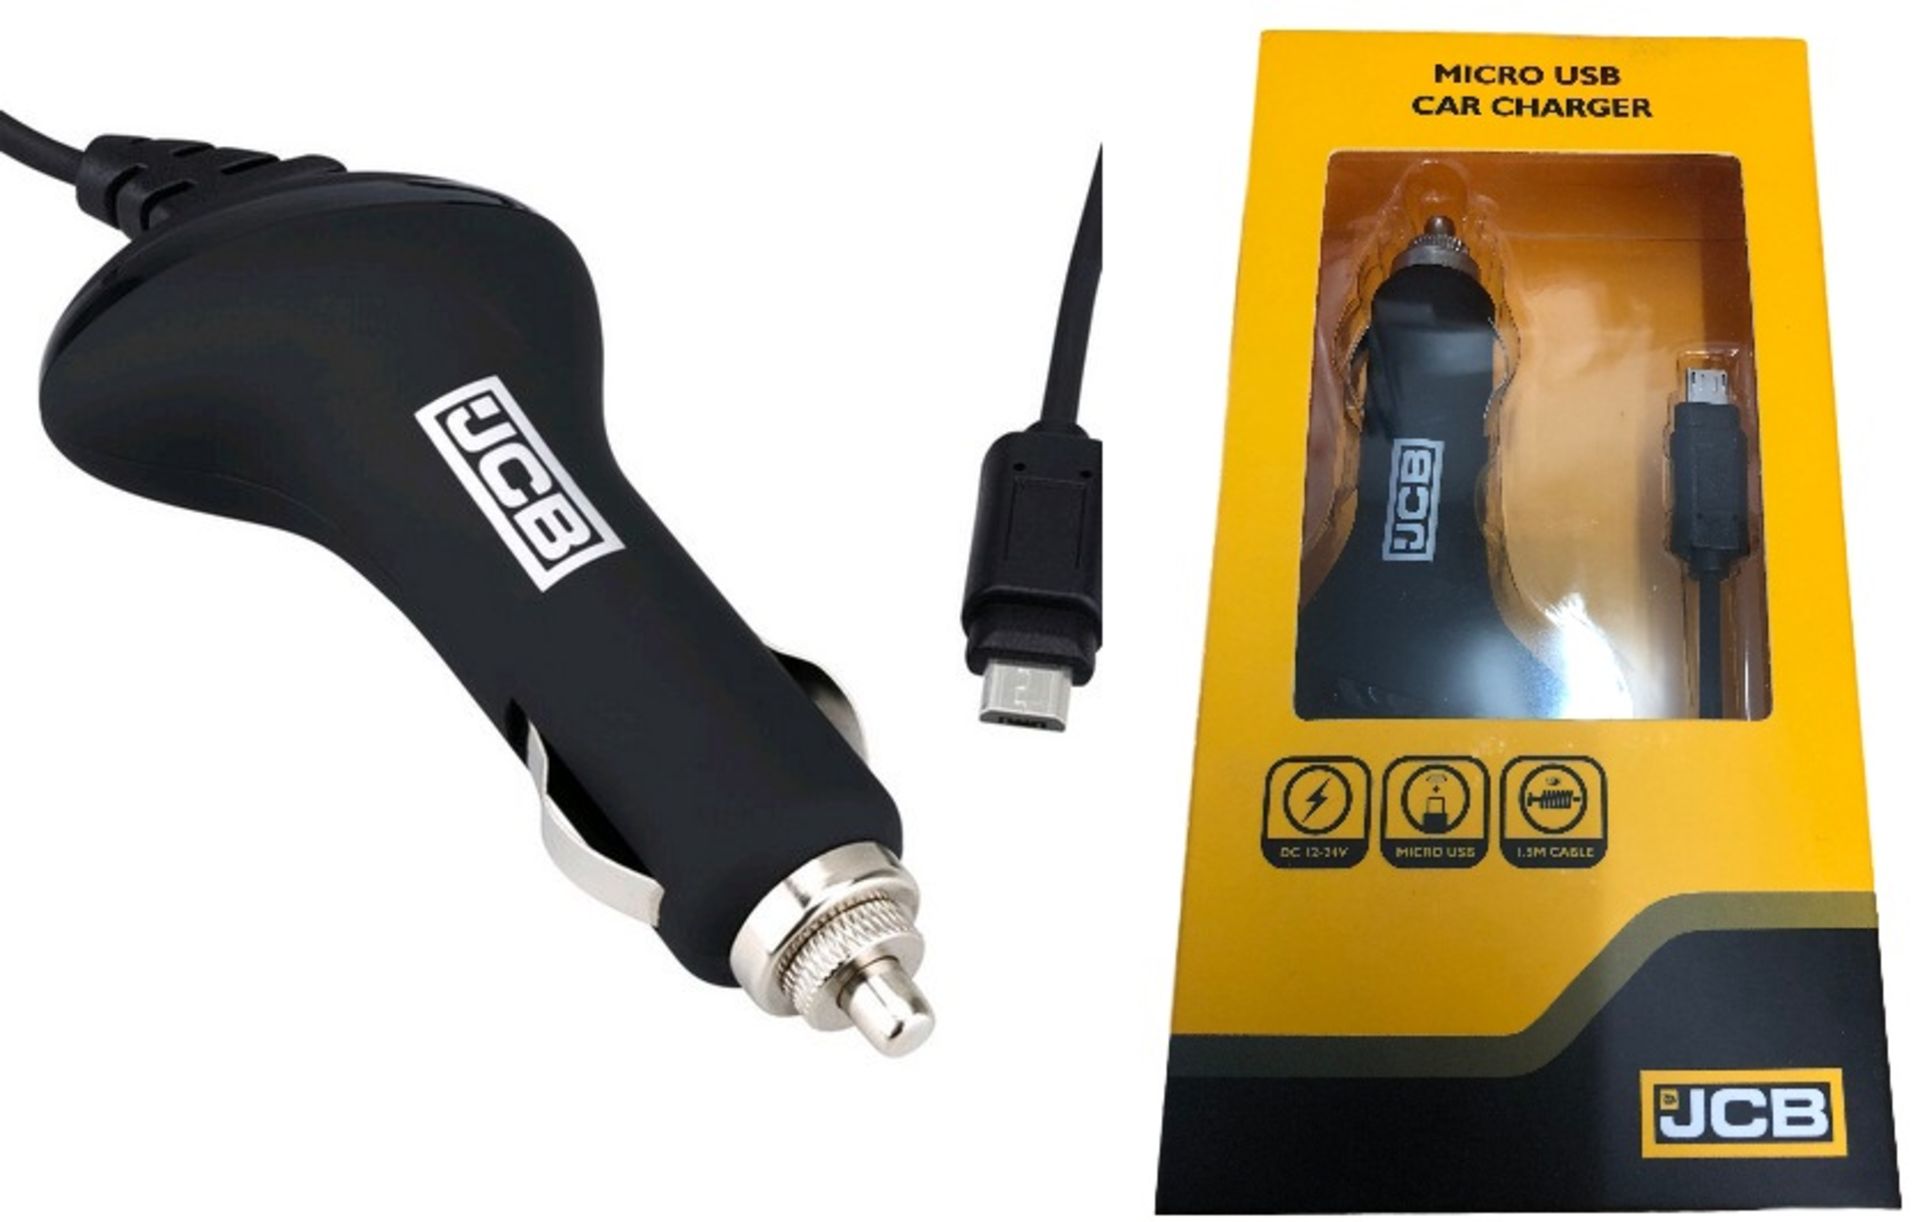 + VAT Brand New JCB 12V Micro USB Car Charger - DC 12-24V - Micro USB Connector - 1.5M Coiled Cable